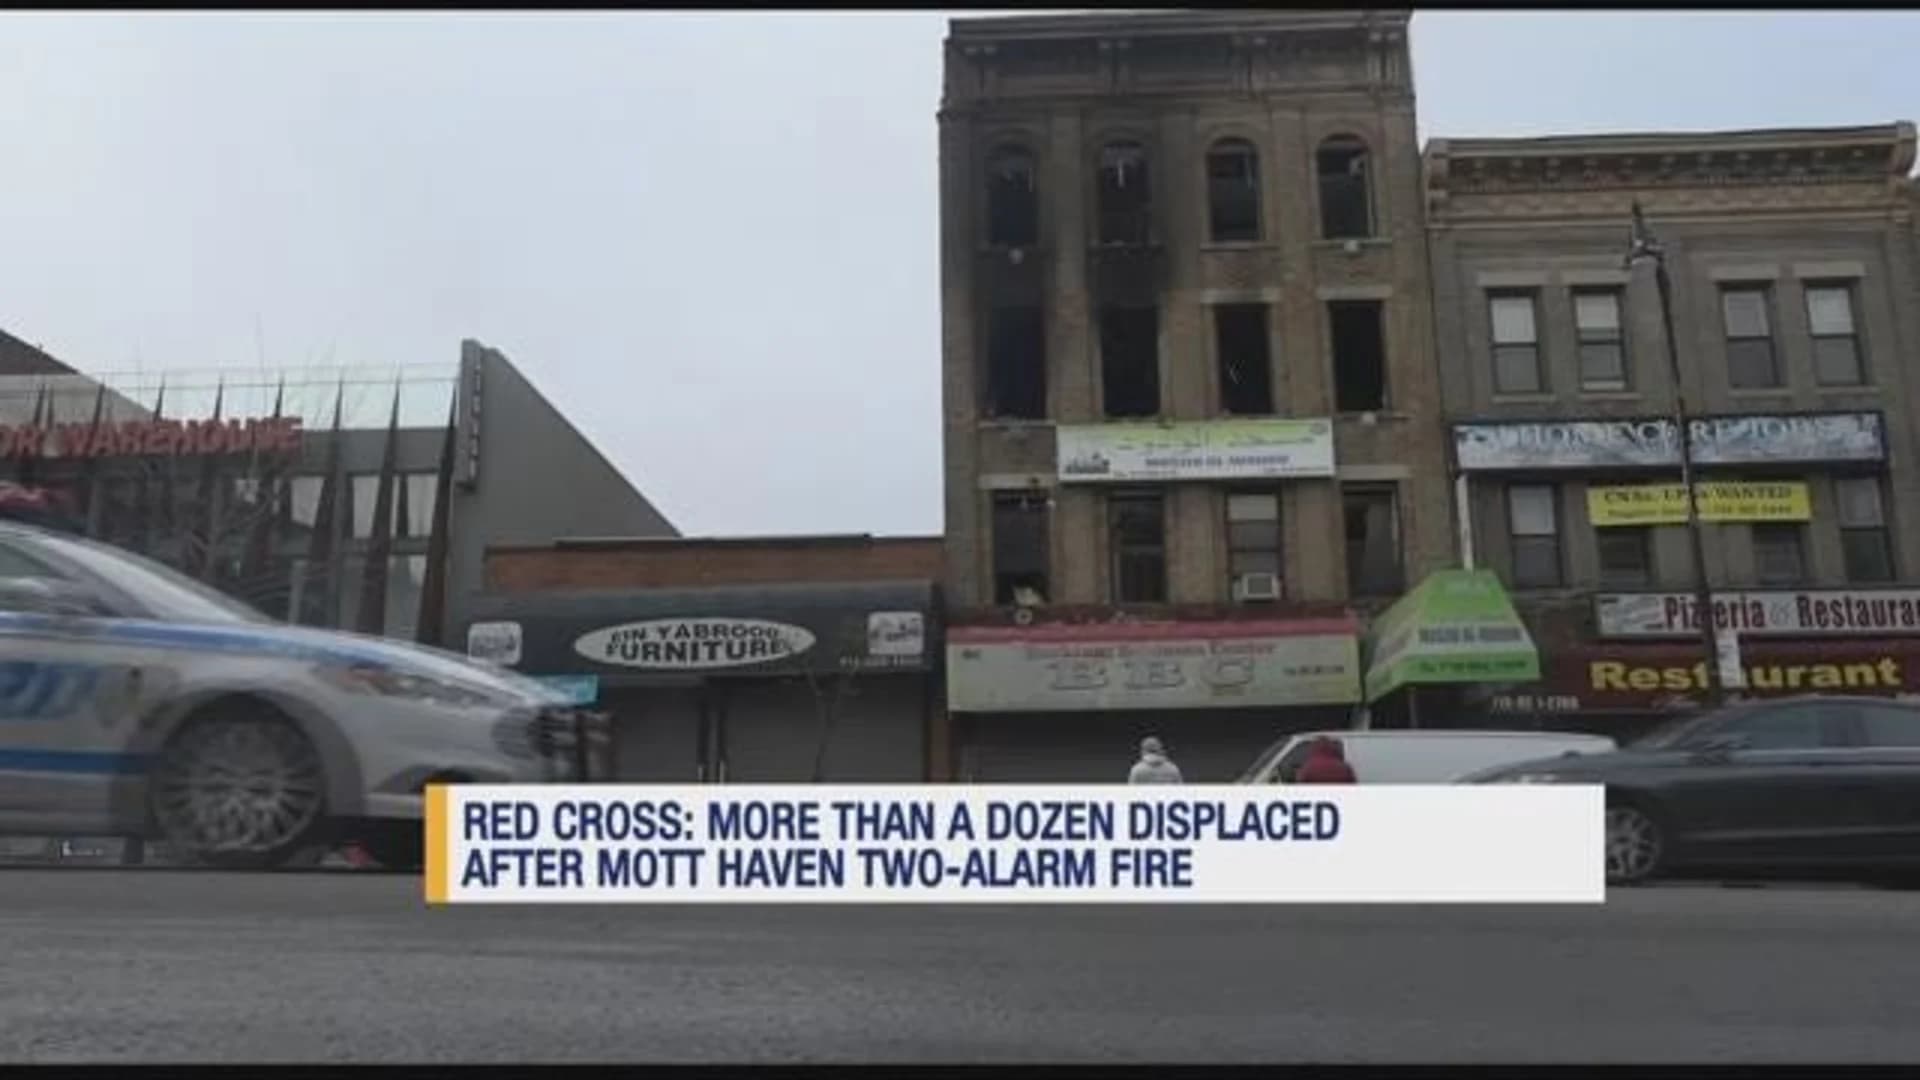 Red Cross: More than a dozen displaced by 2-alarm fire